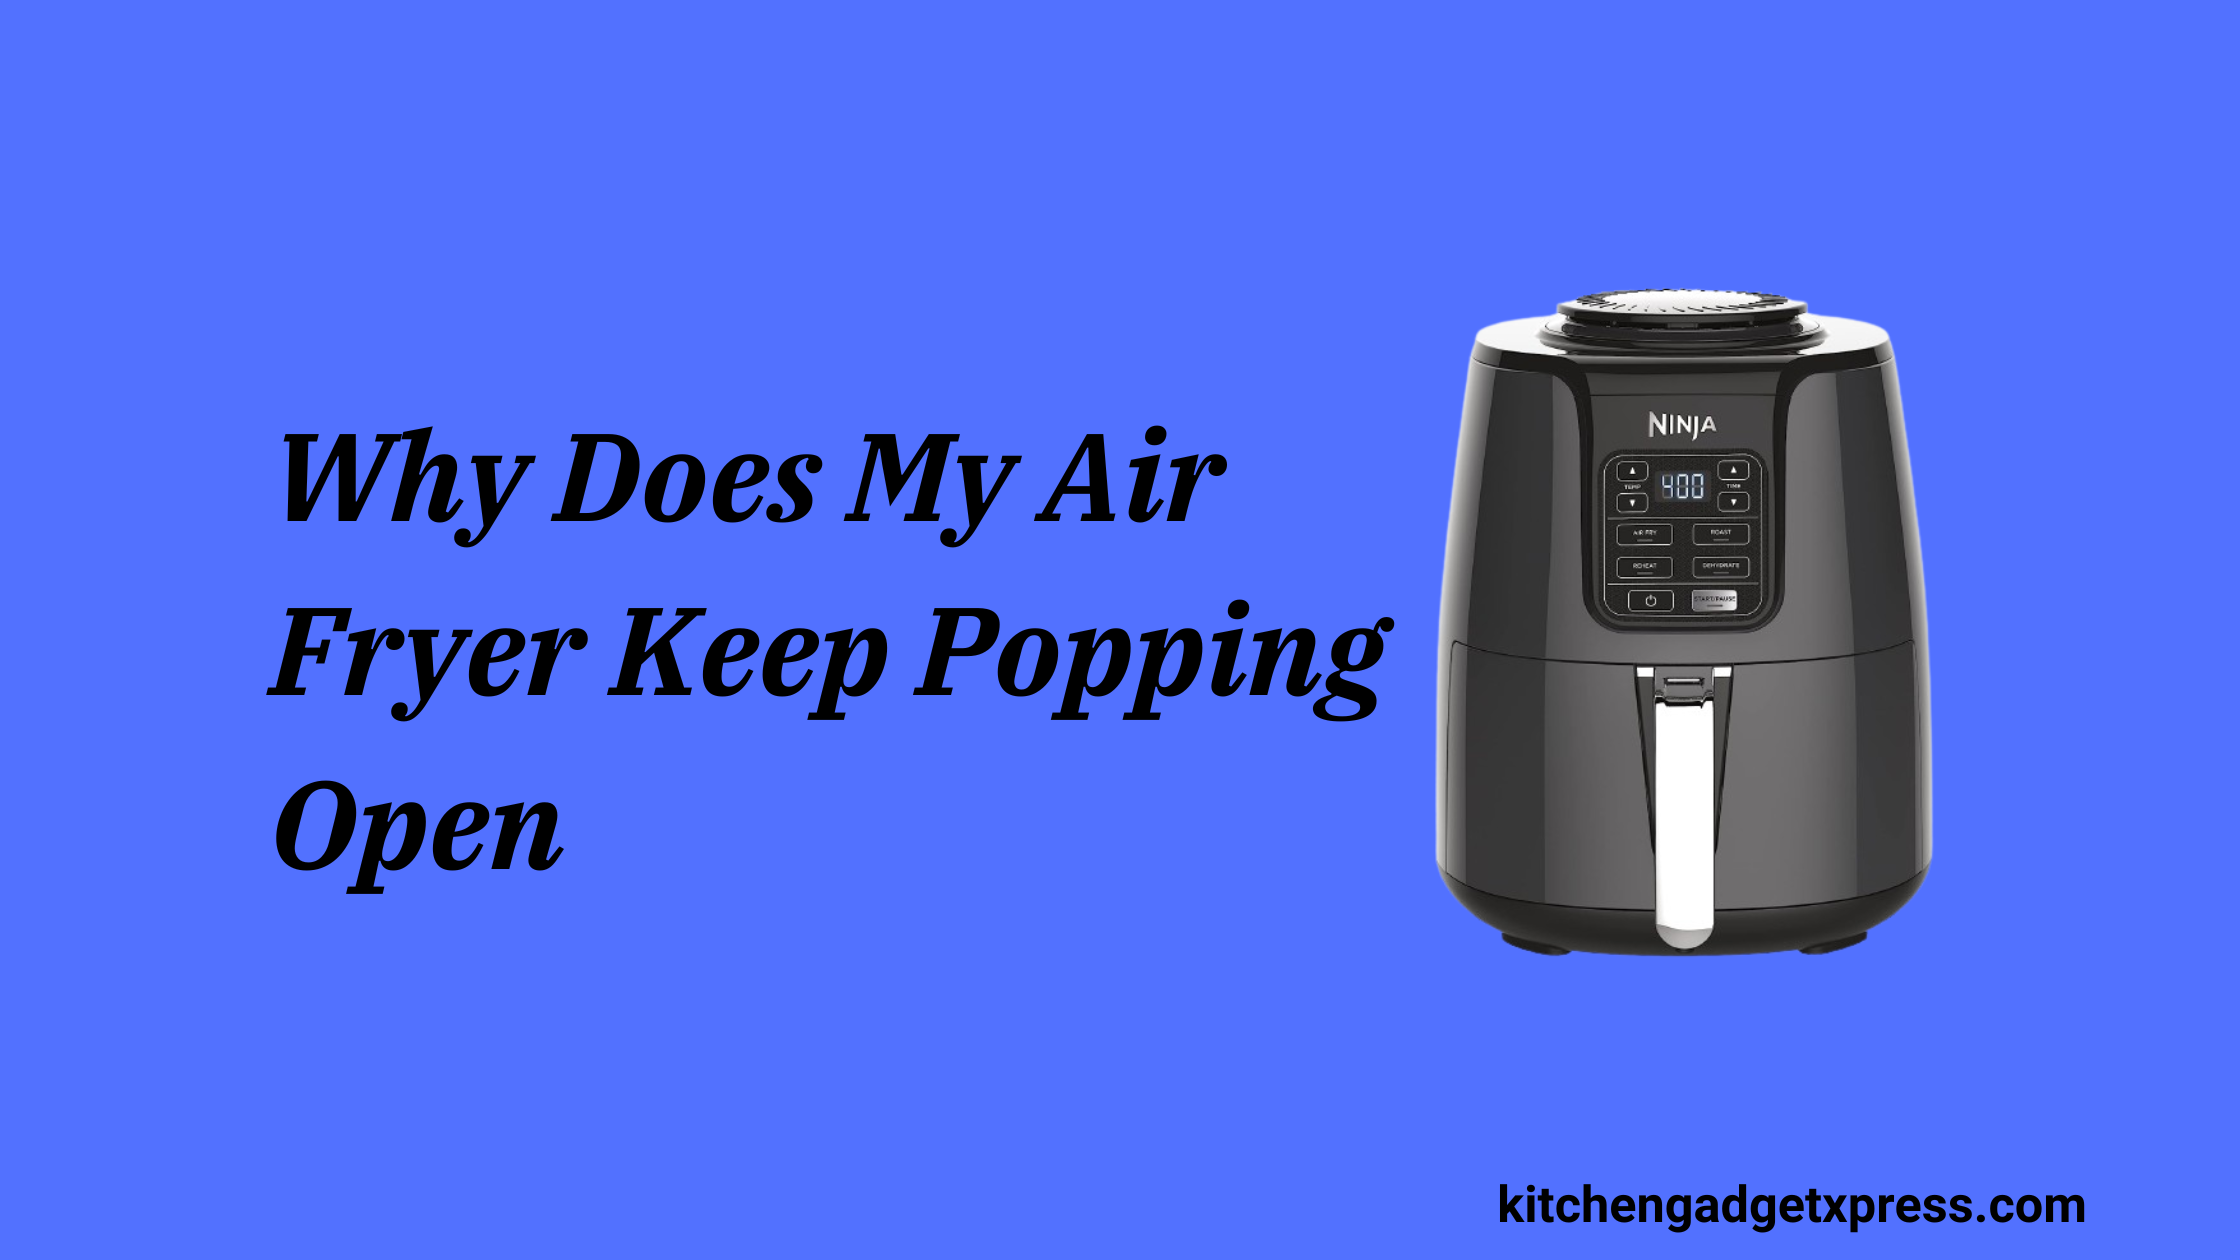 Why Does My Air Fryer Keep Popping Open